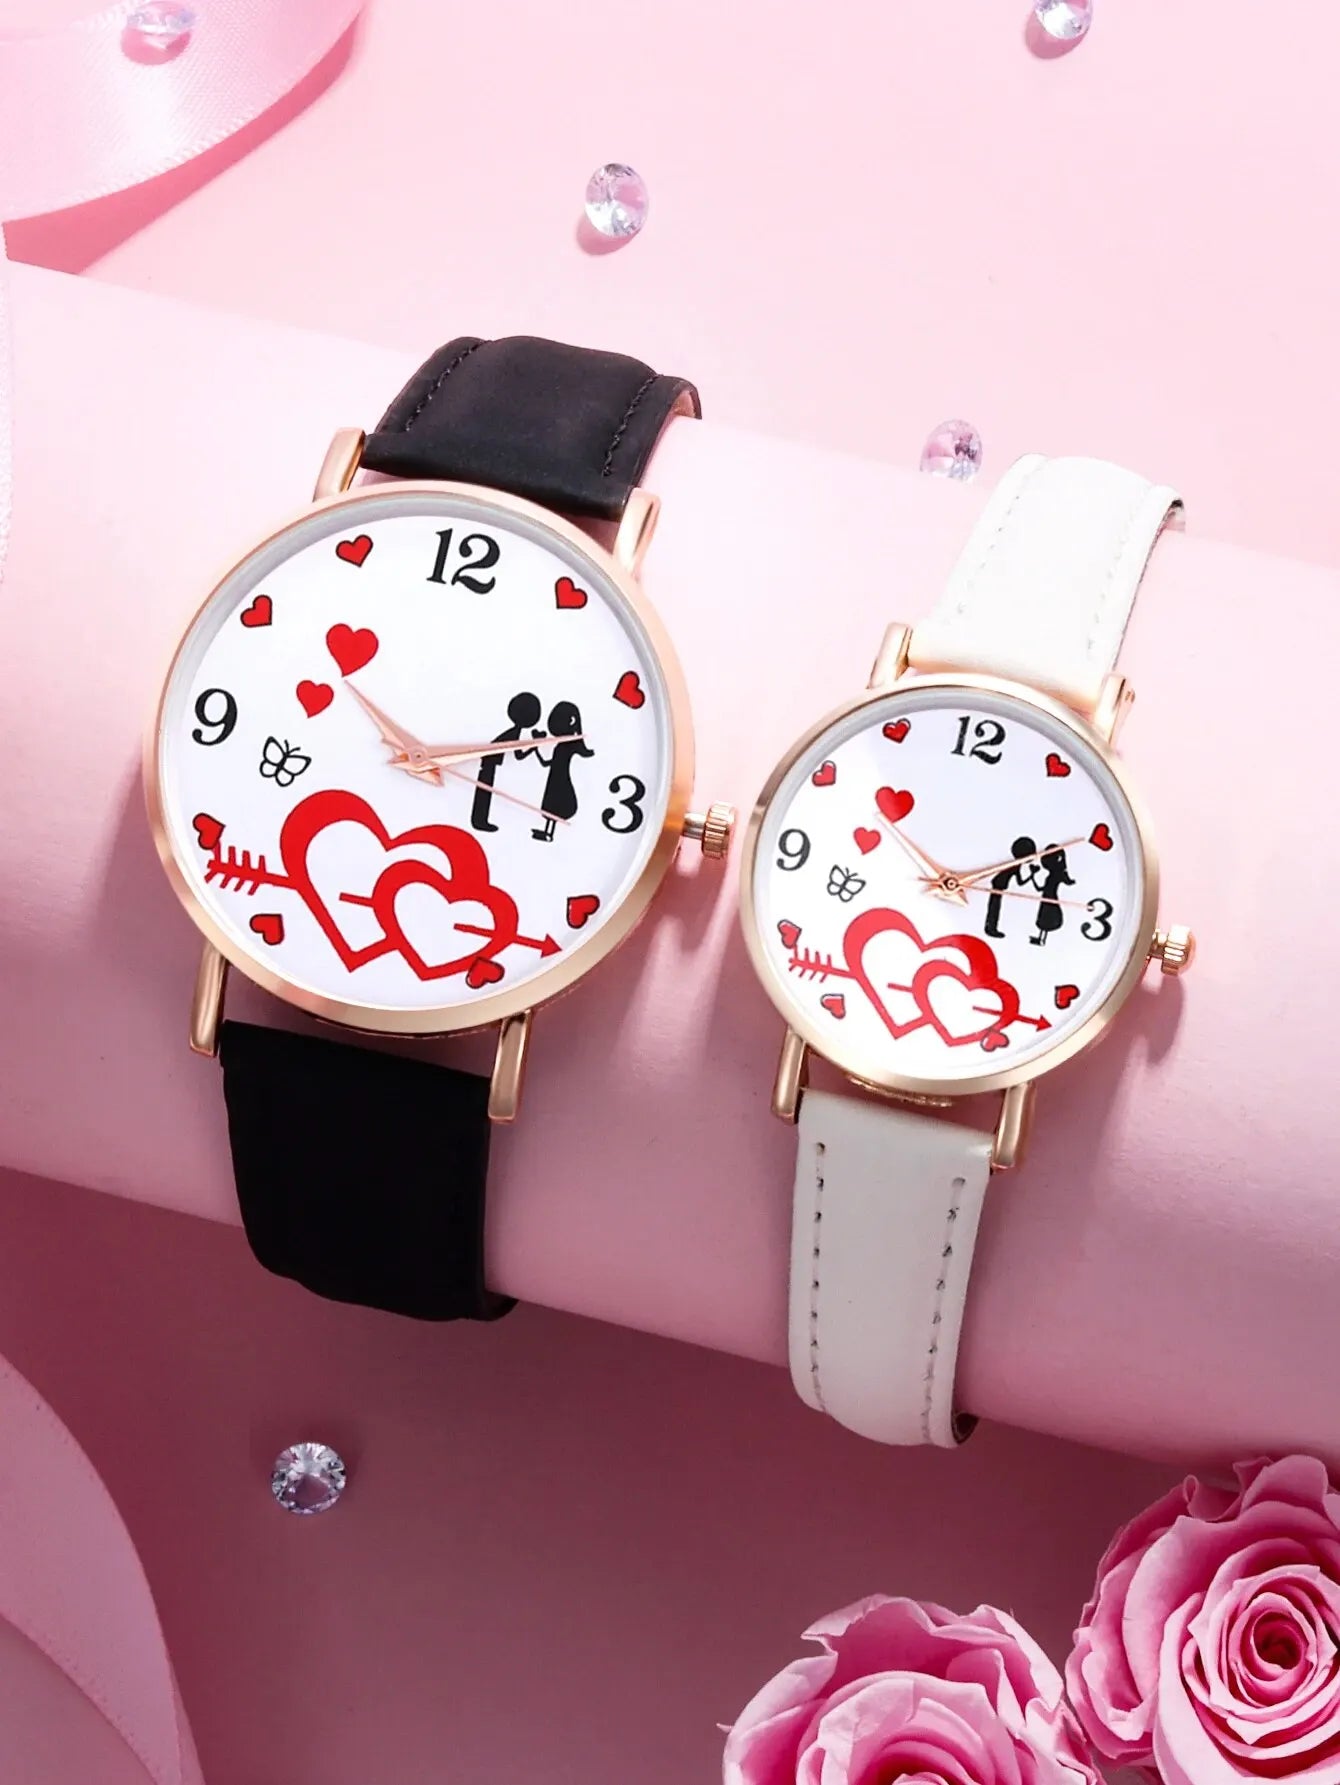 Women Men Fashion Trend Simple Love Digital Stainless Steel Leather Quartz Couple Watch Romantic Happiness Valentine's Day Sift